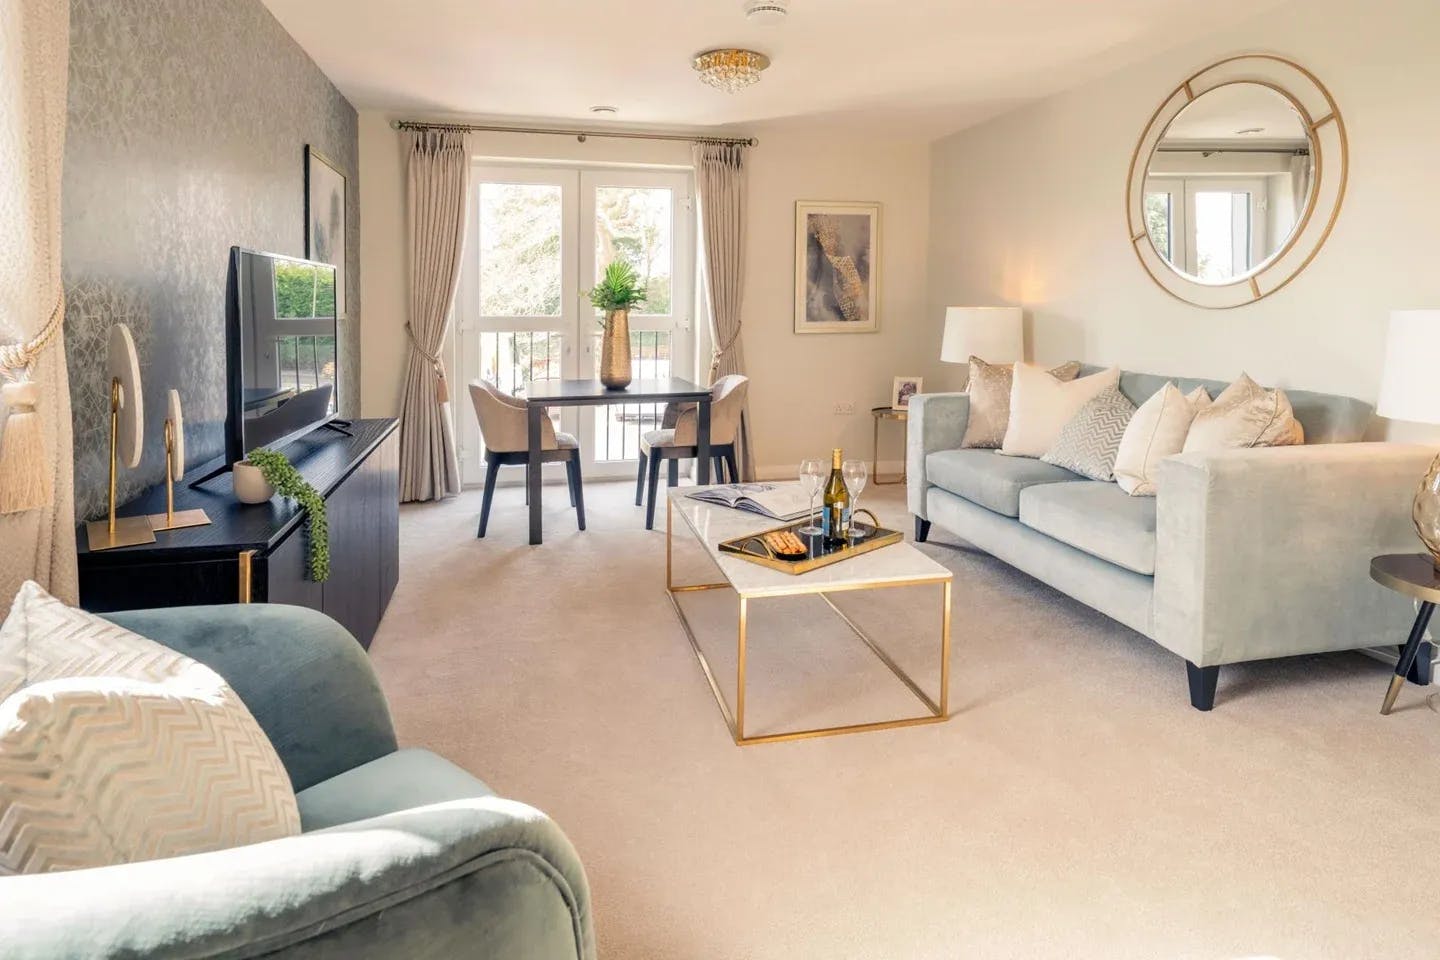 Living Room of The Cedars Retirement Village Two Bedroom Apartment For Rent in Cheshire, North West England